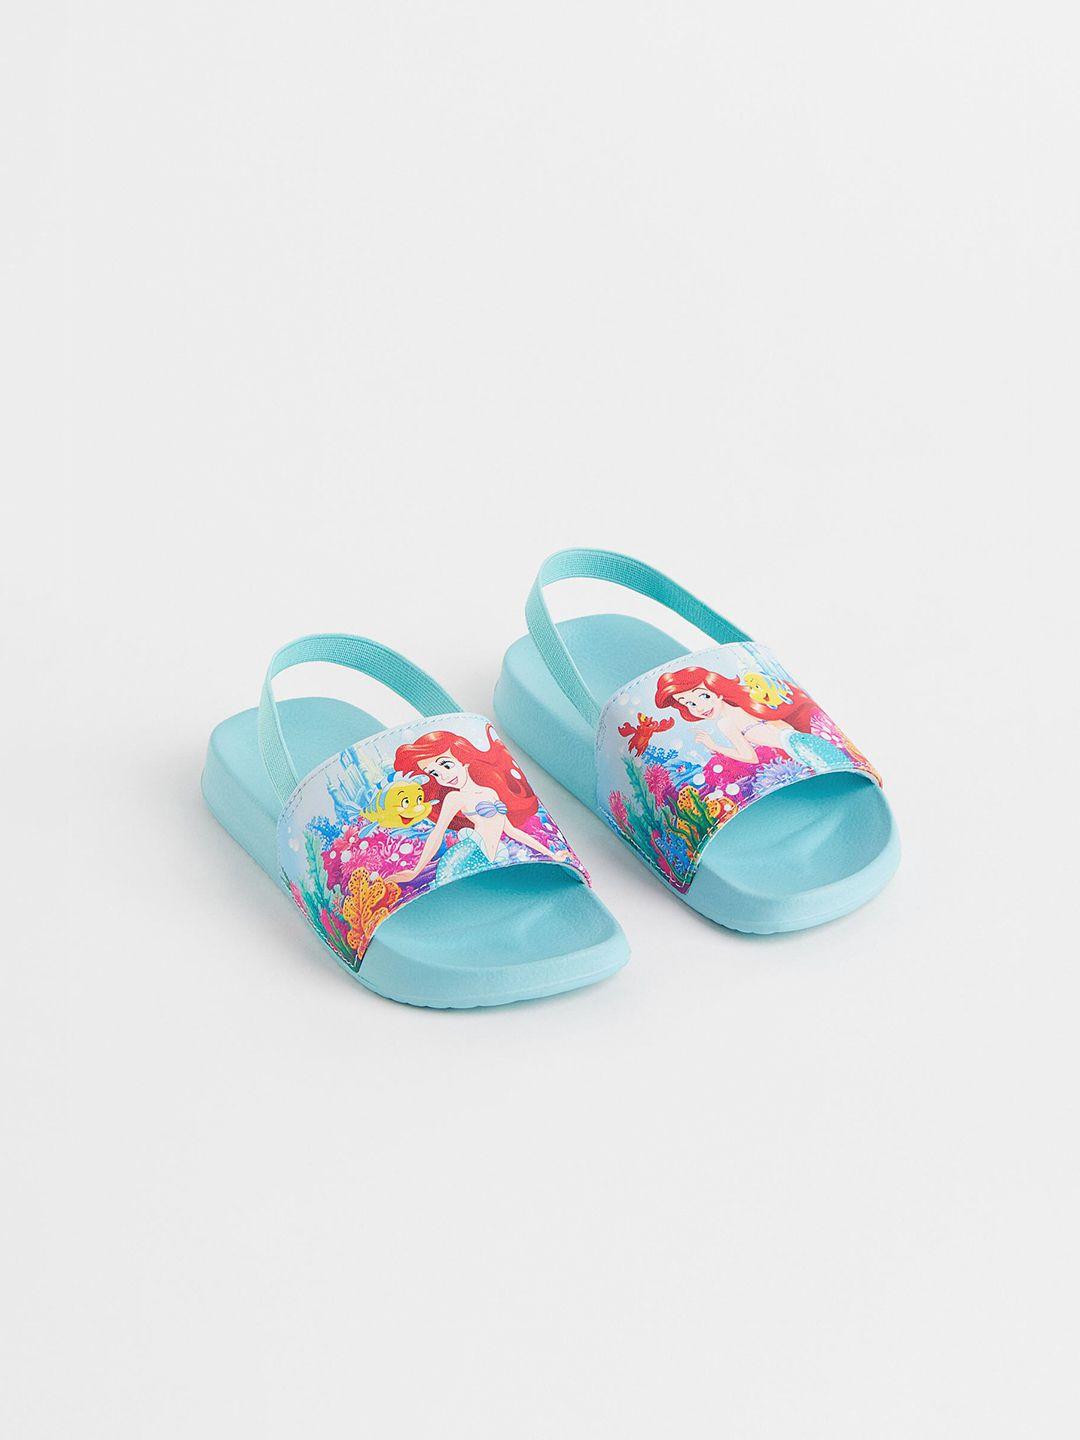 h&m girls multicolored printed pool shoes